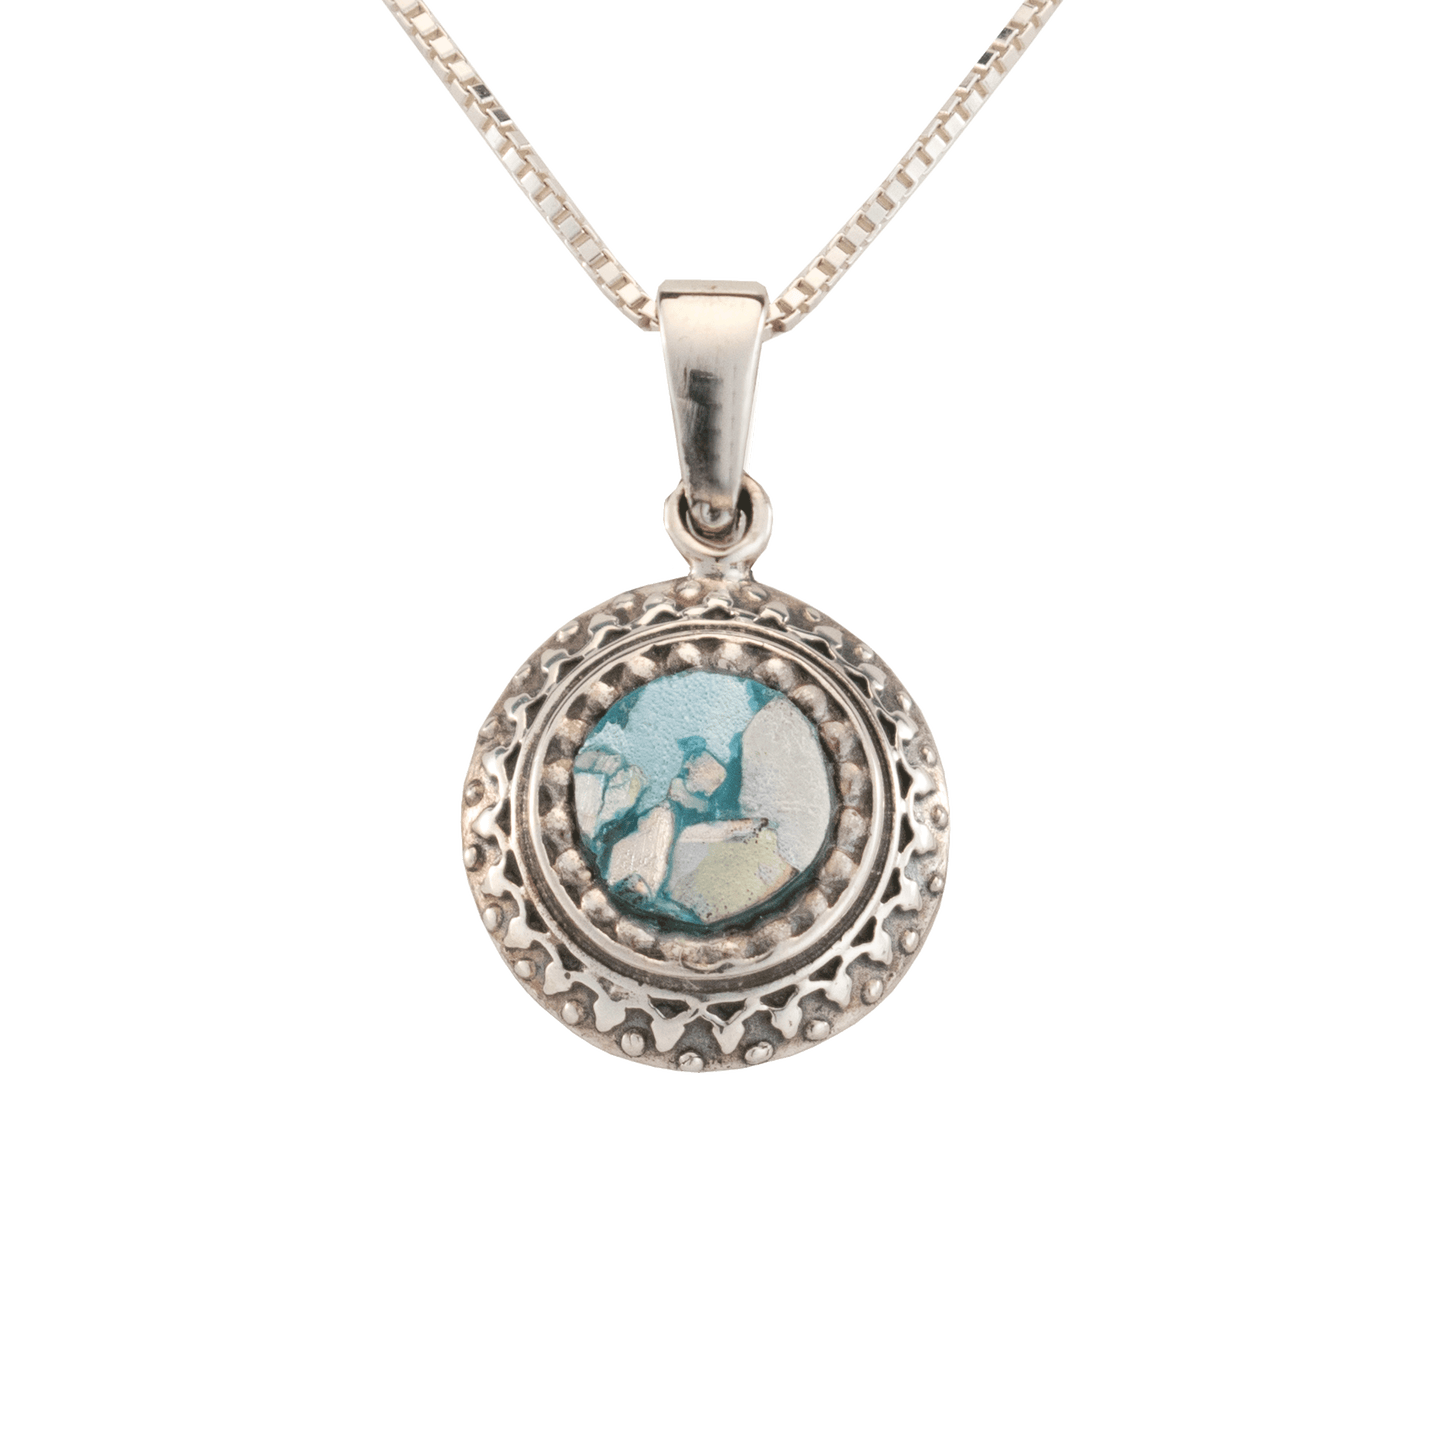 Roman Glass Circle Necklace with Silver Detailing